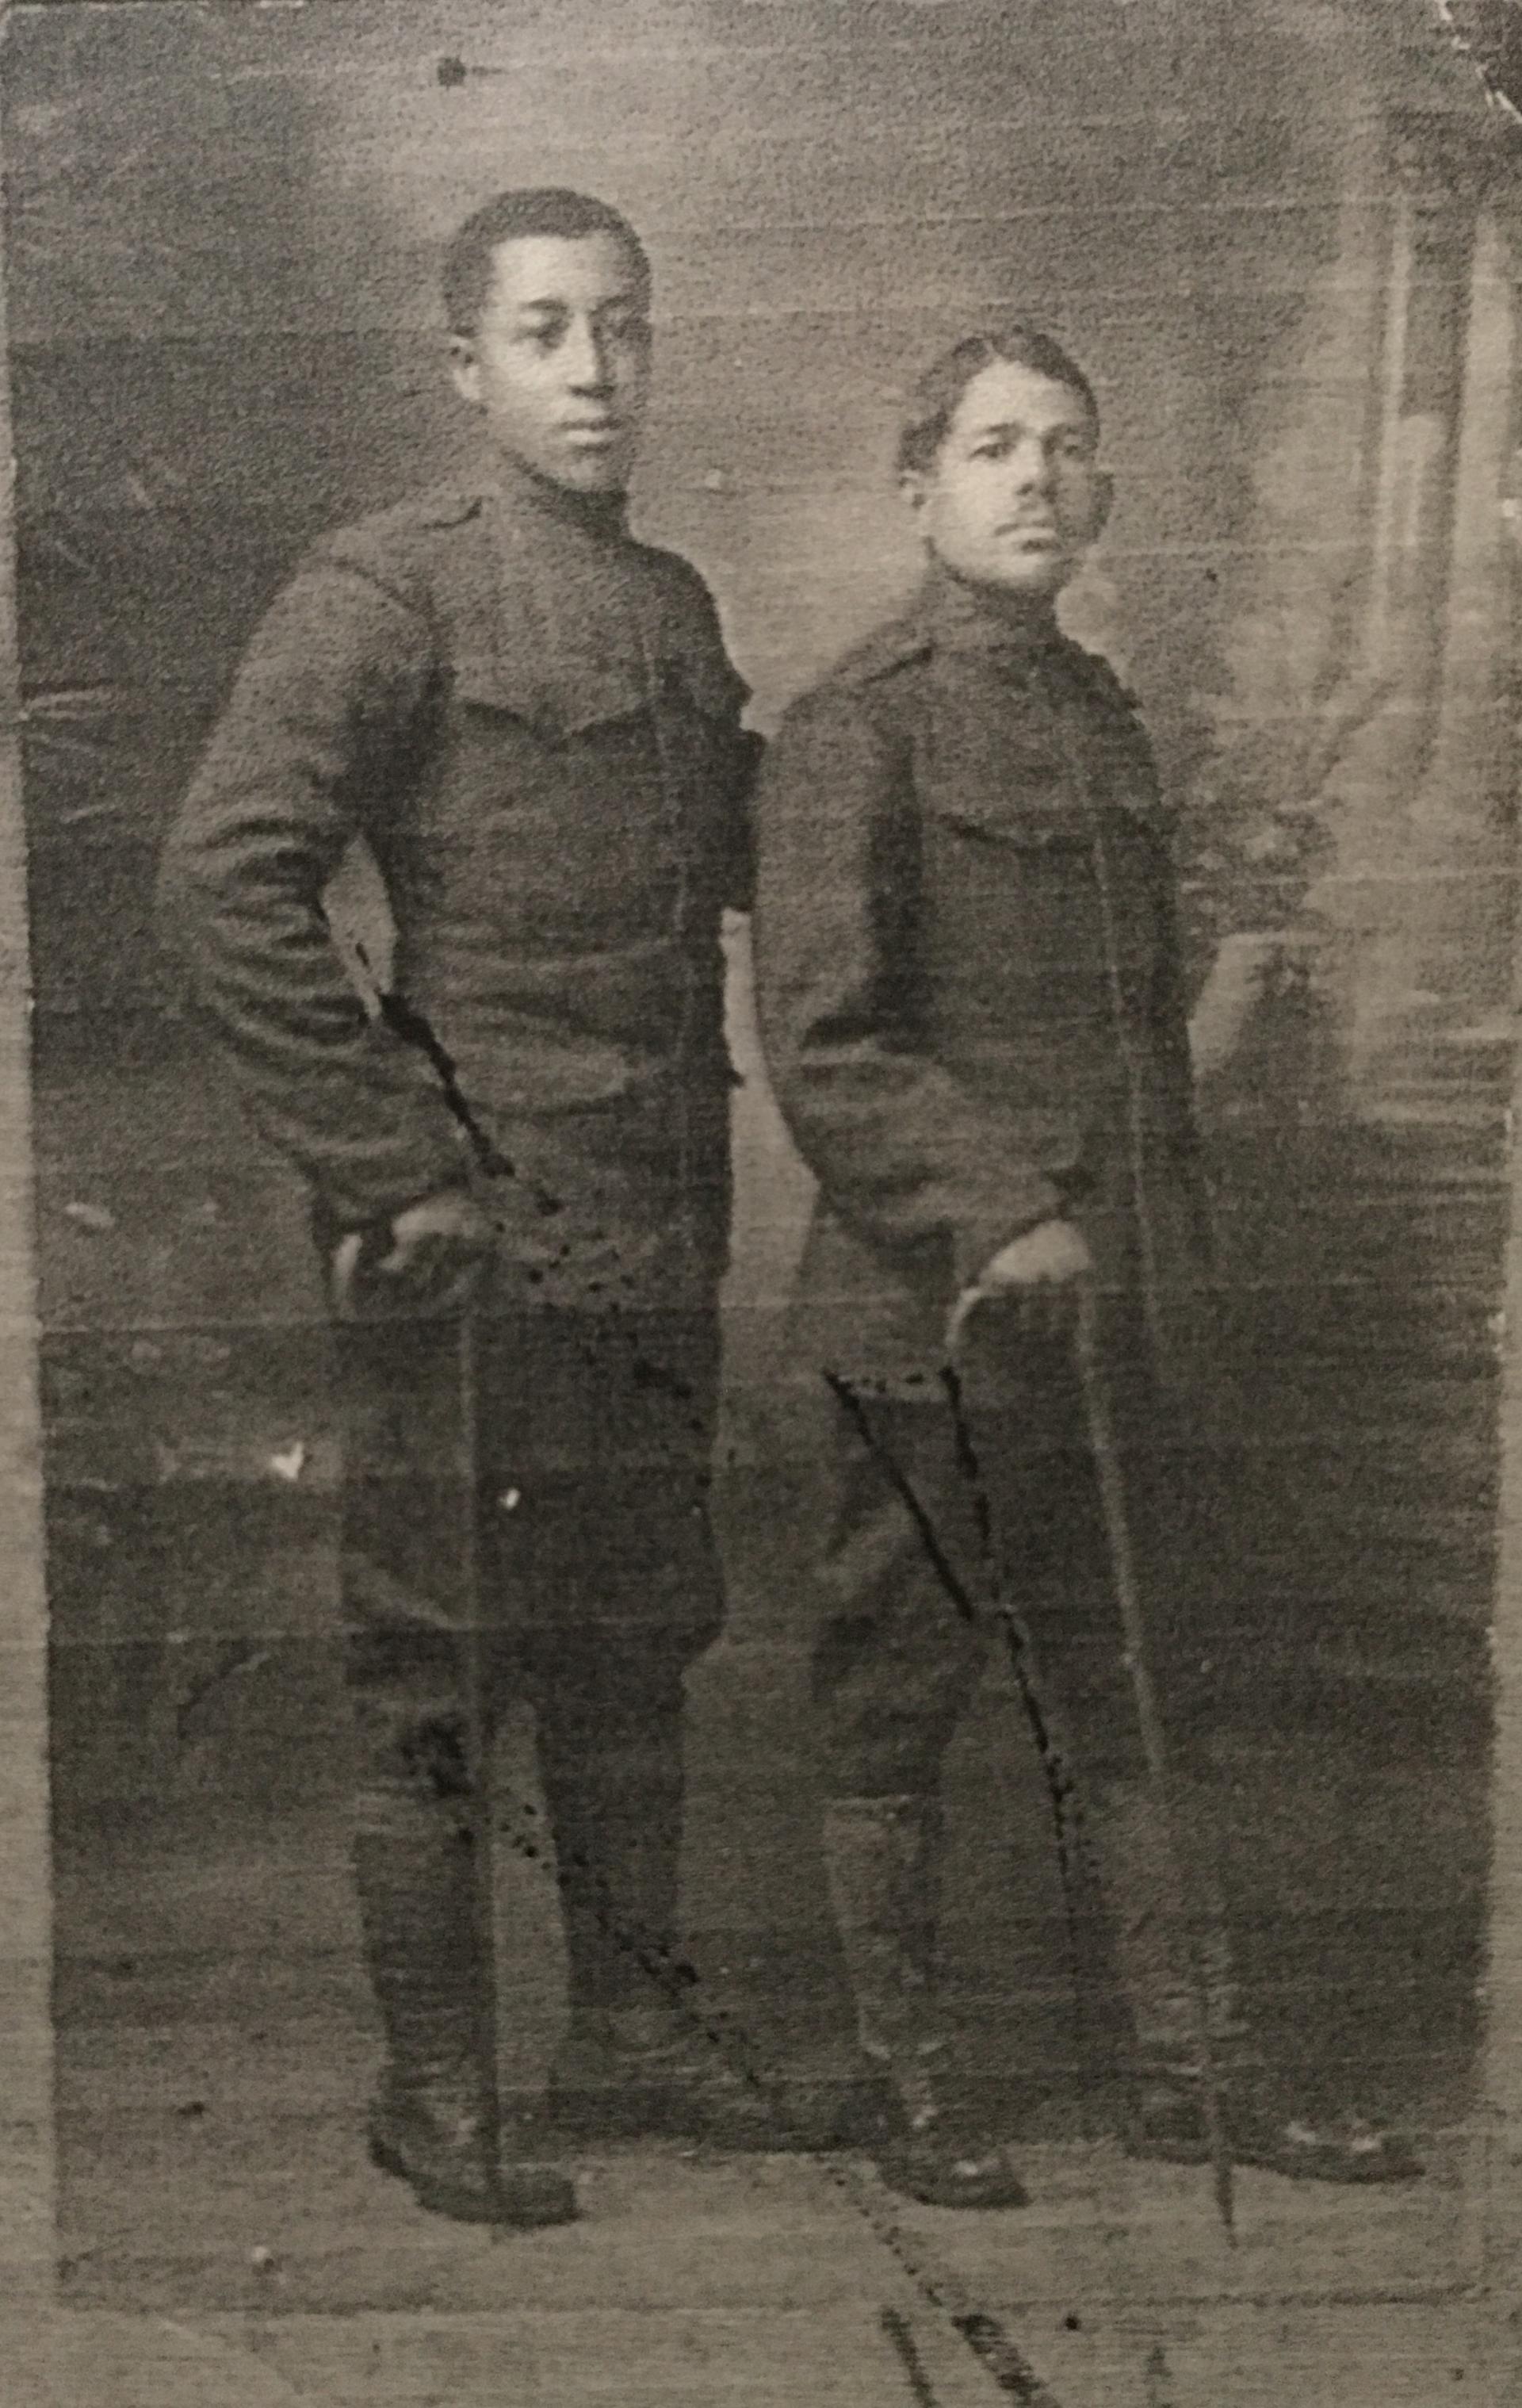 Cpl. Jesse Moore, right, was among the 13 soldiers hanged.